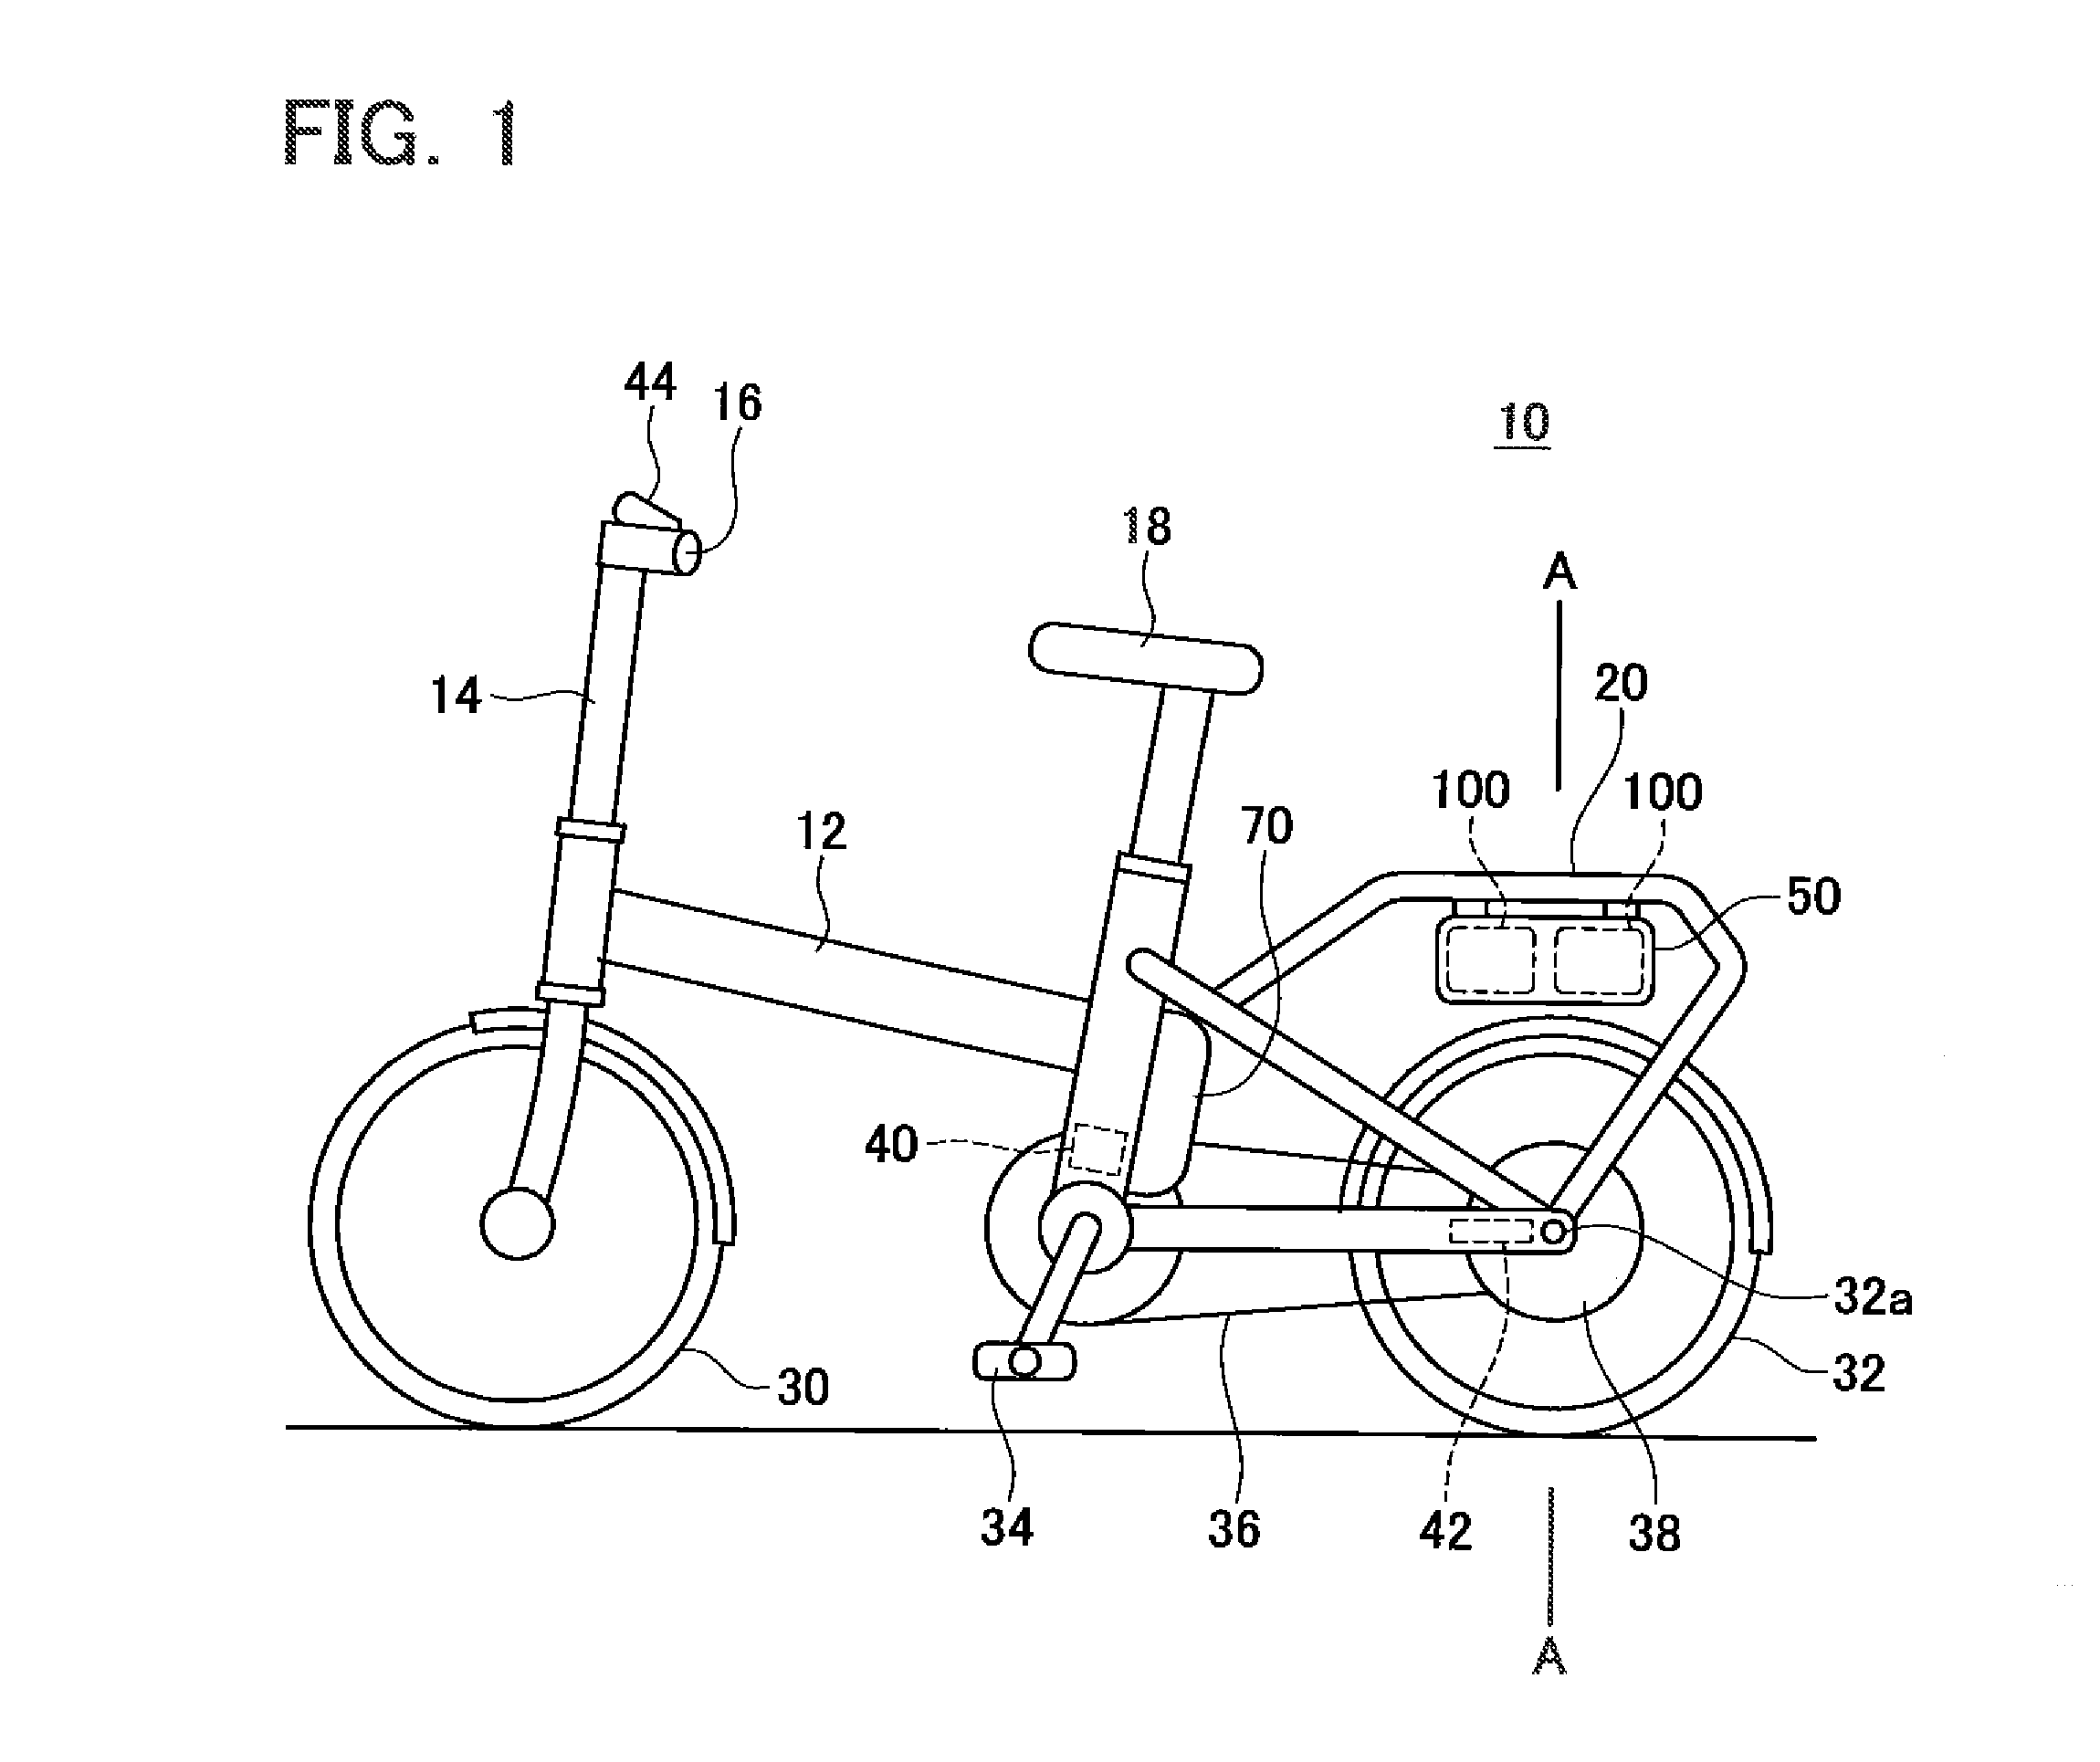 Electric wheeled apparatus powered by battery packs